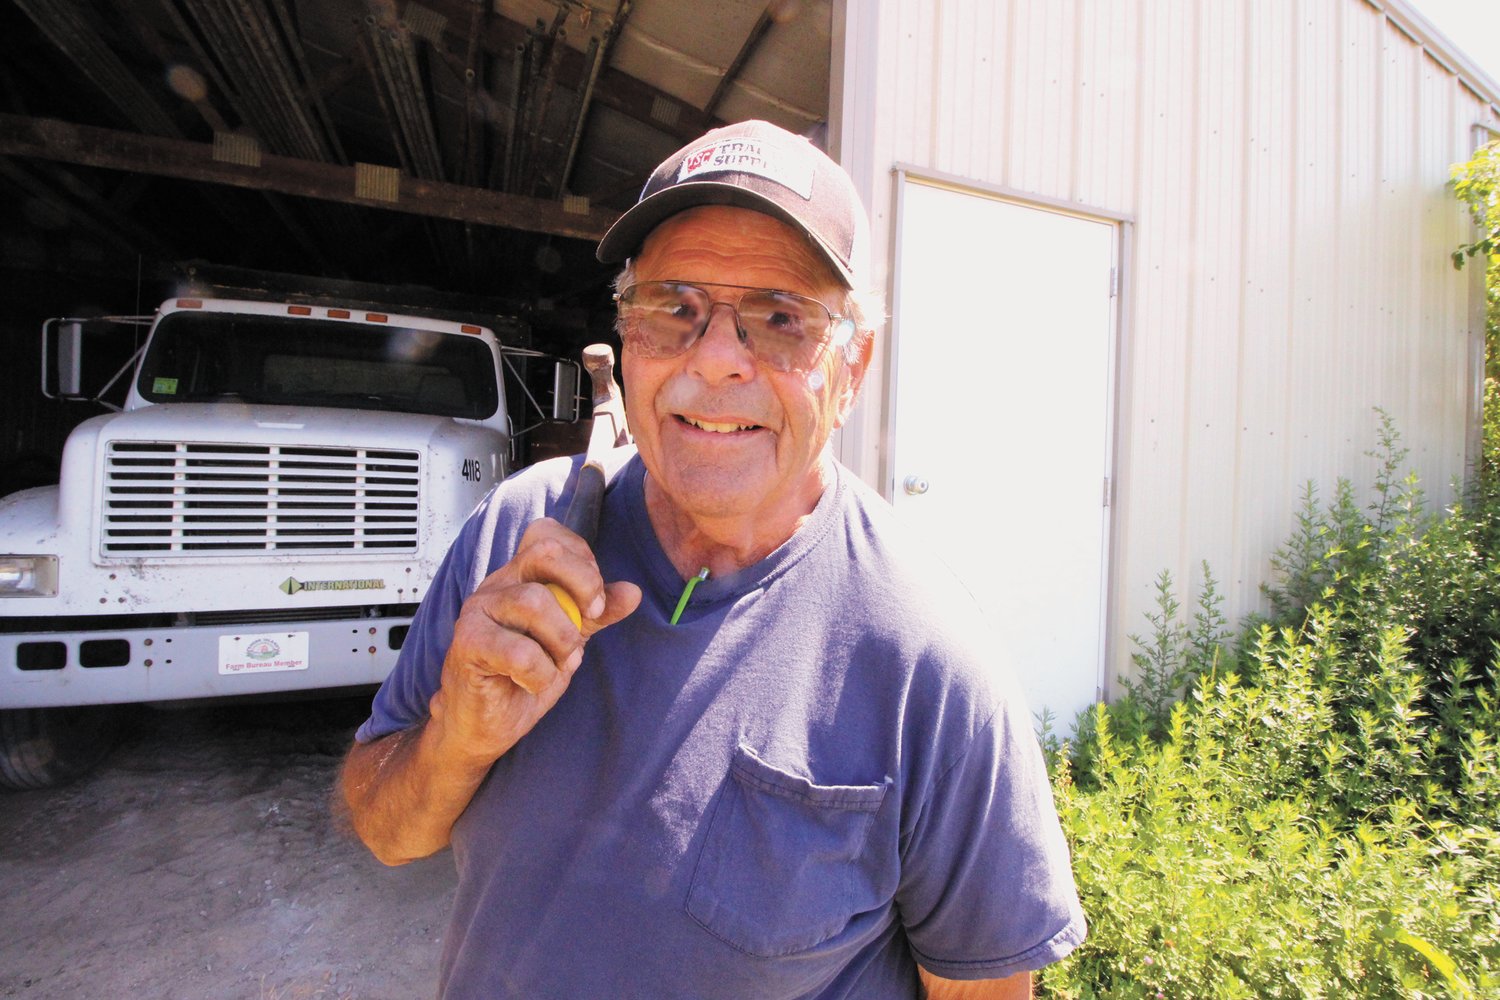 WHAT WILL BE, WILL BE: John “Pete” Morris is accustomed to expecting the unexpected. He is a farmer after all. But he does think the state DOT could have stuck to its stated plan to do road work impacting his farm in the spring instead of now when the corn season is starting. (Warwick Beacon photos)